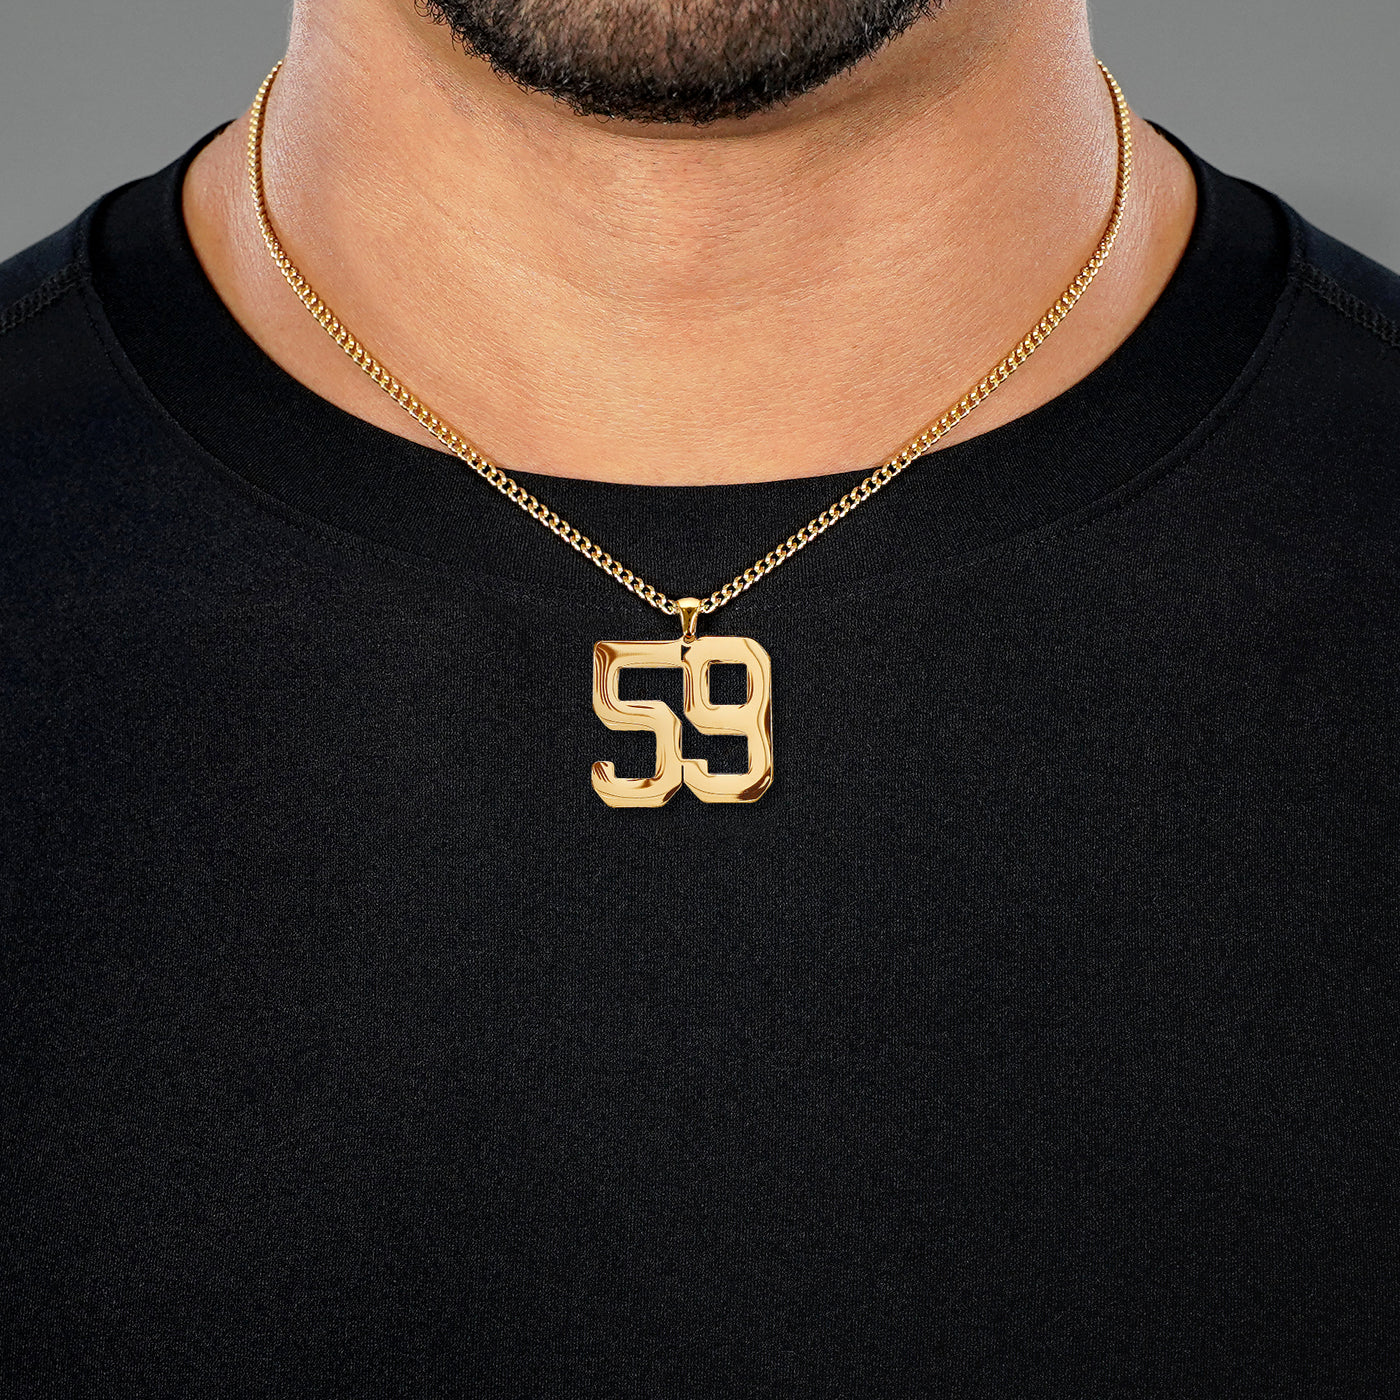 59 Number Pendant with Chain Necklace - Gold Plated Stainless Steel